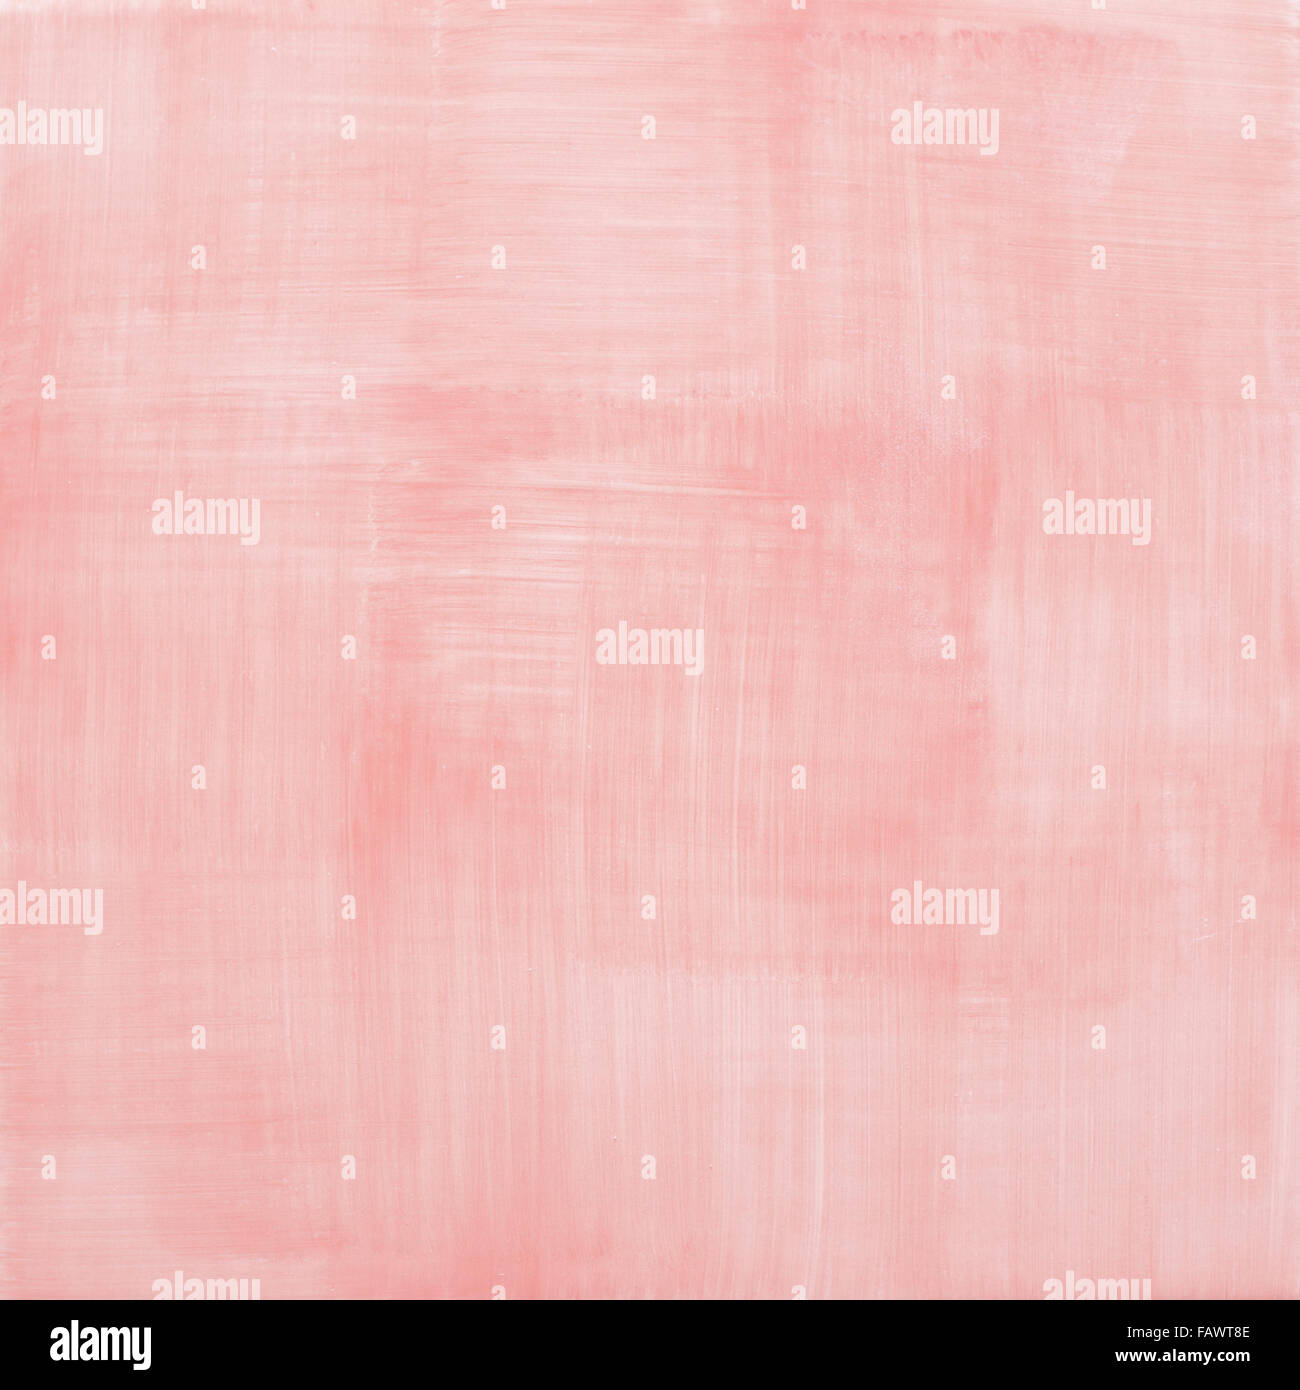 Endless texture of rose quartz pink color rough surface with brush stroke Stock Photo